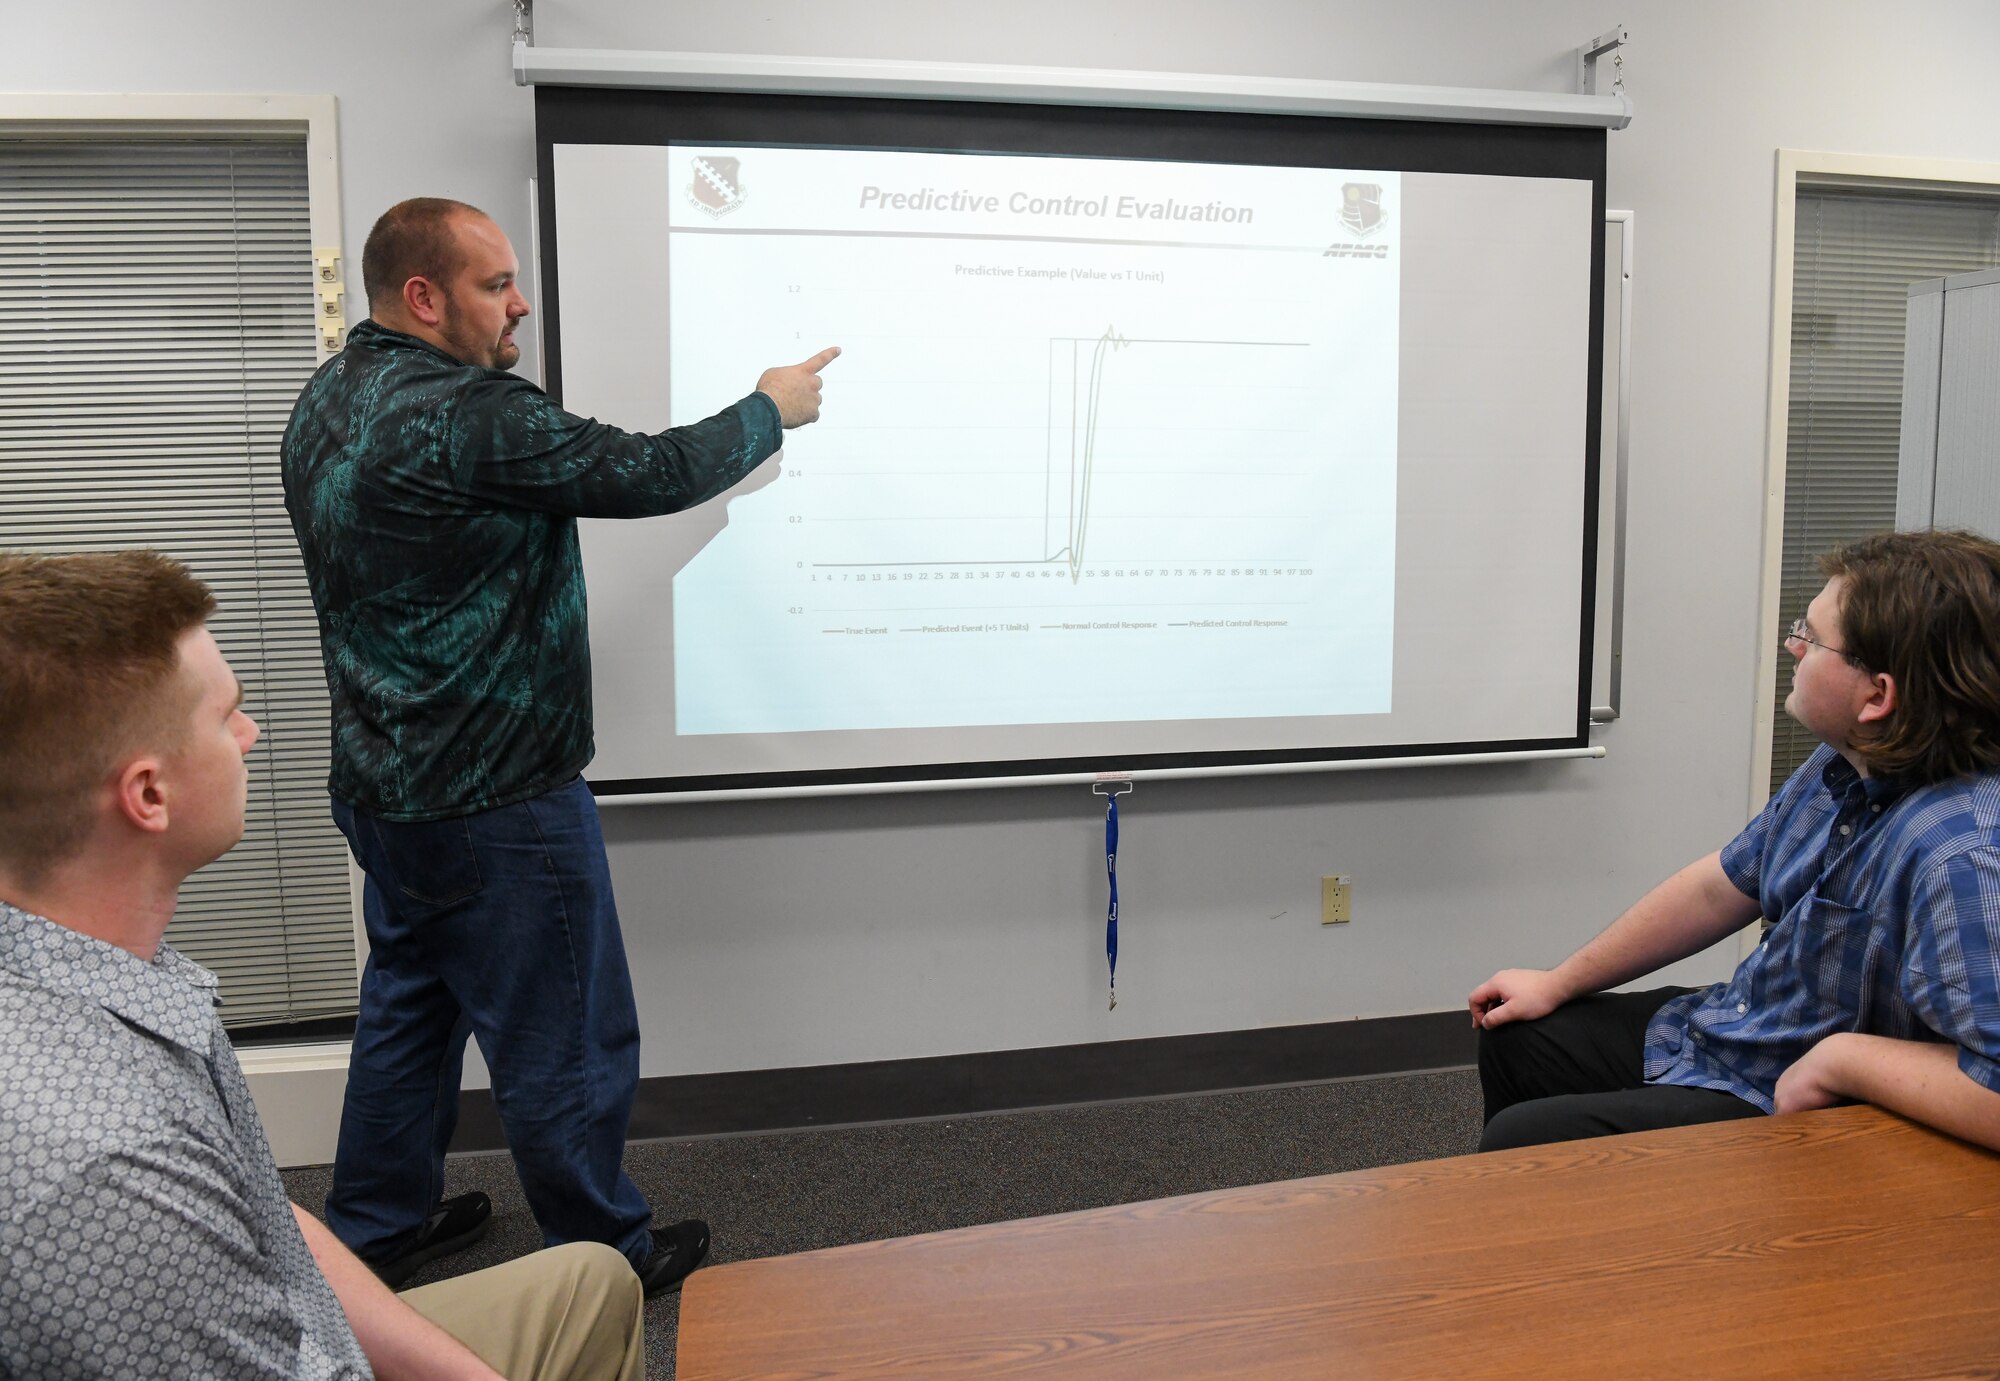 Will Garner, instrumentation, data and controls technical lead for the Test Information Systems Section of Arnold Engineering Development Complex, speaks June 9, 2022, about a proposal to use models for predictive control with Sawyer Gurganus, left, and Jason Corbett, both instrumentation, data and control engineering interns for an AEDC contractor at Arnold Air Force Base, Tennessee. (U.S. Air Force photo by Jill Pickett)